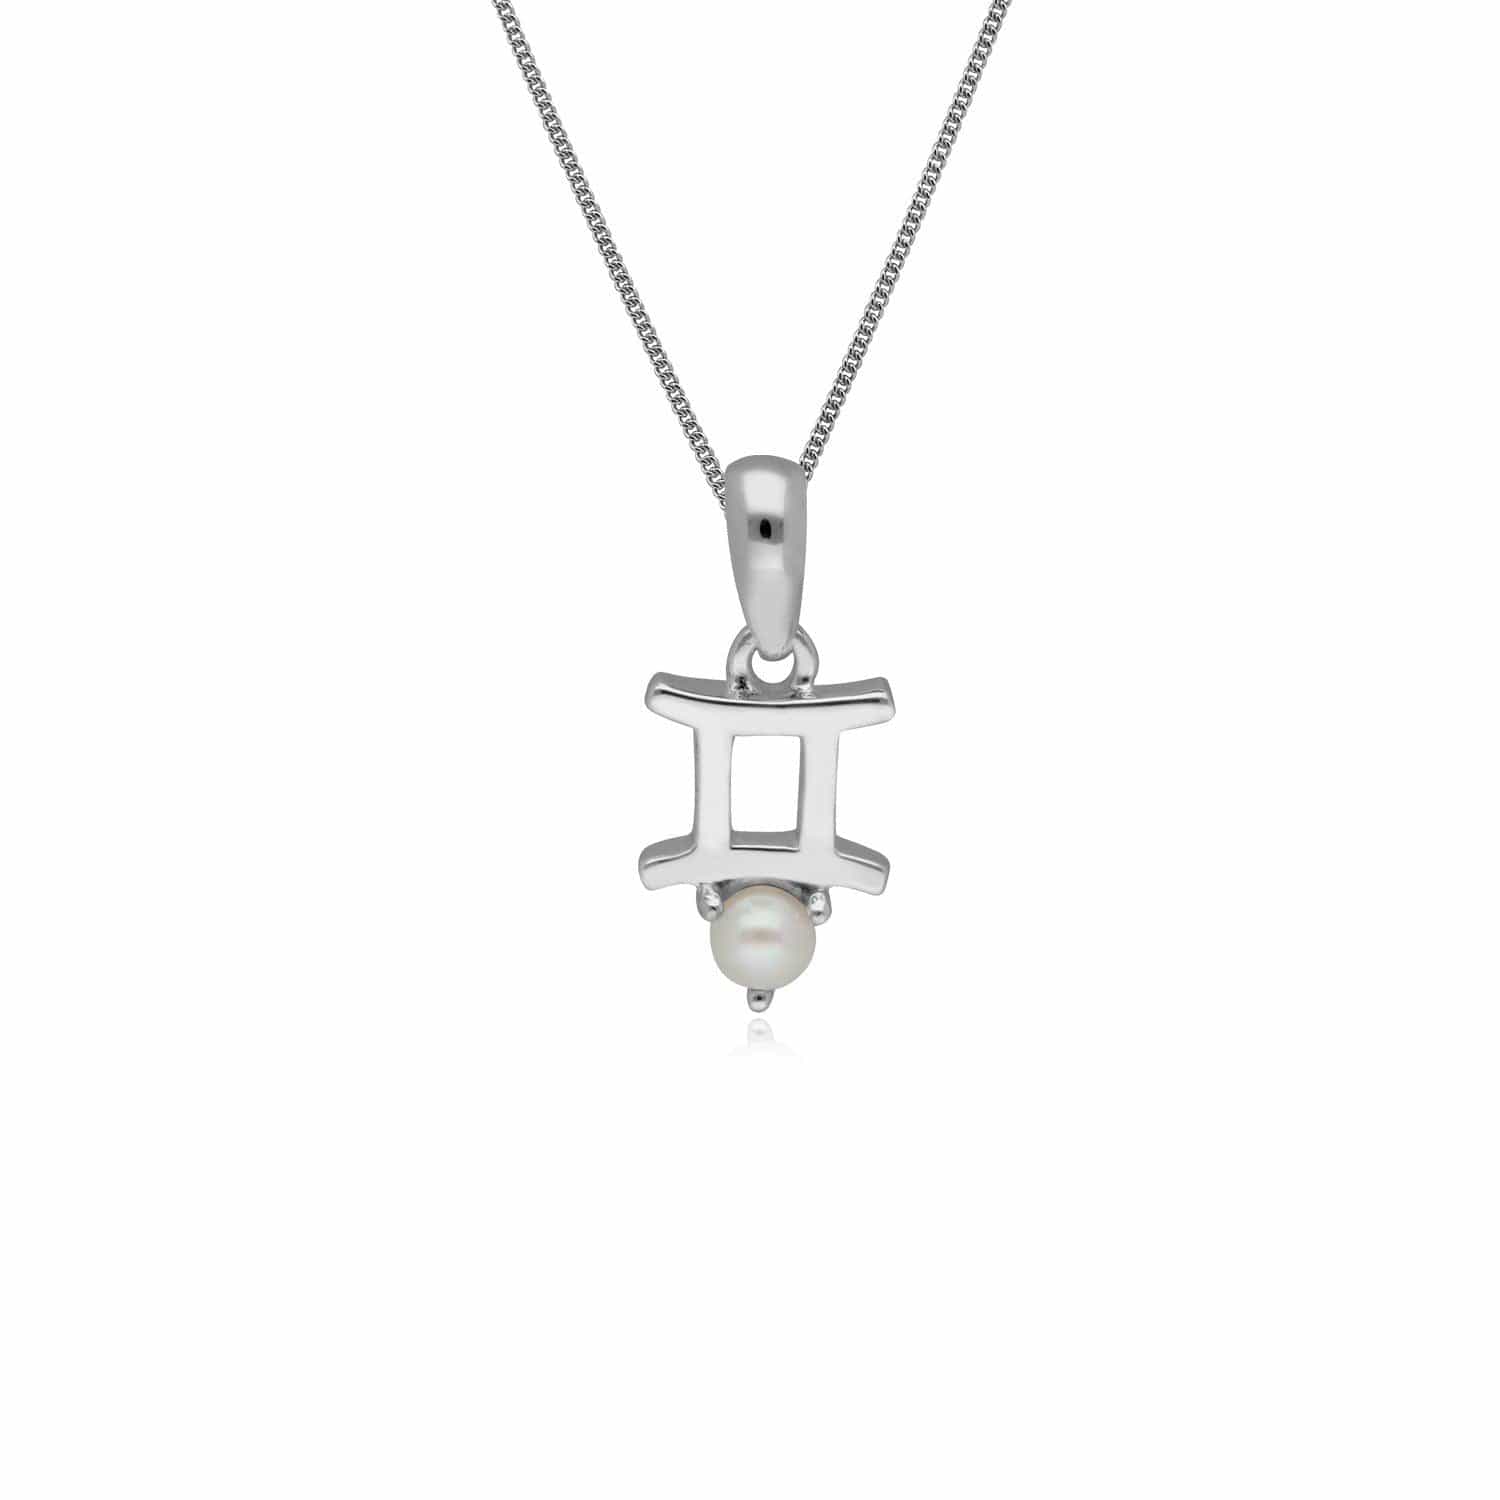 Photos - Pendant / Choker Necklace Pearl Gemini Zodiac Charm Necklace in 9ct White Gold